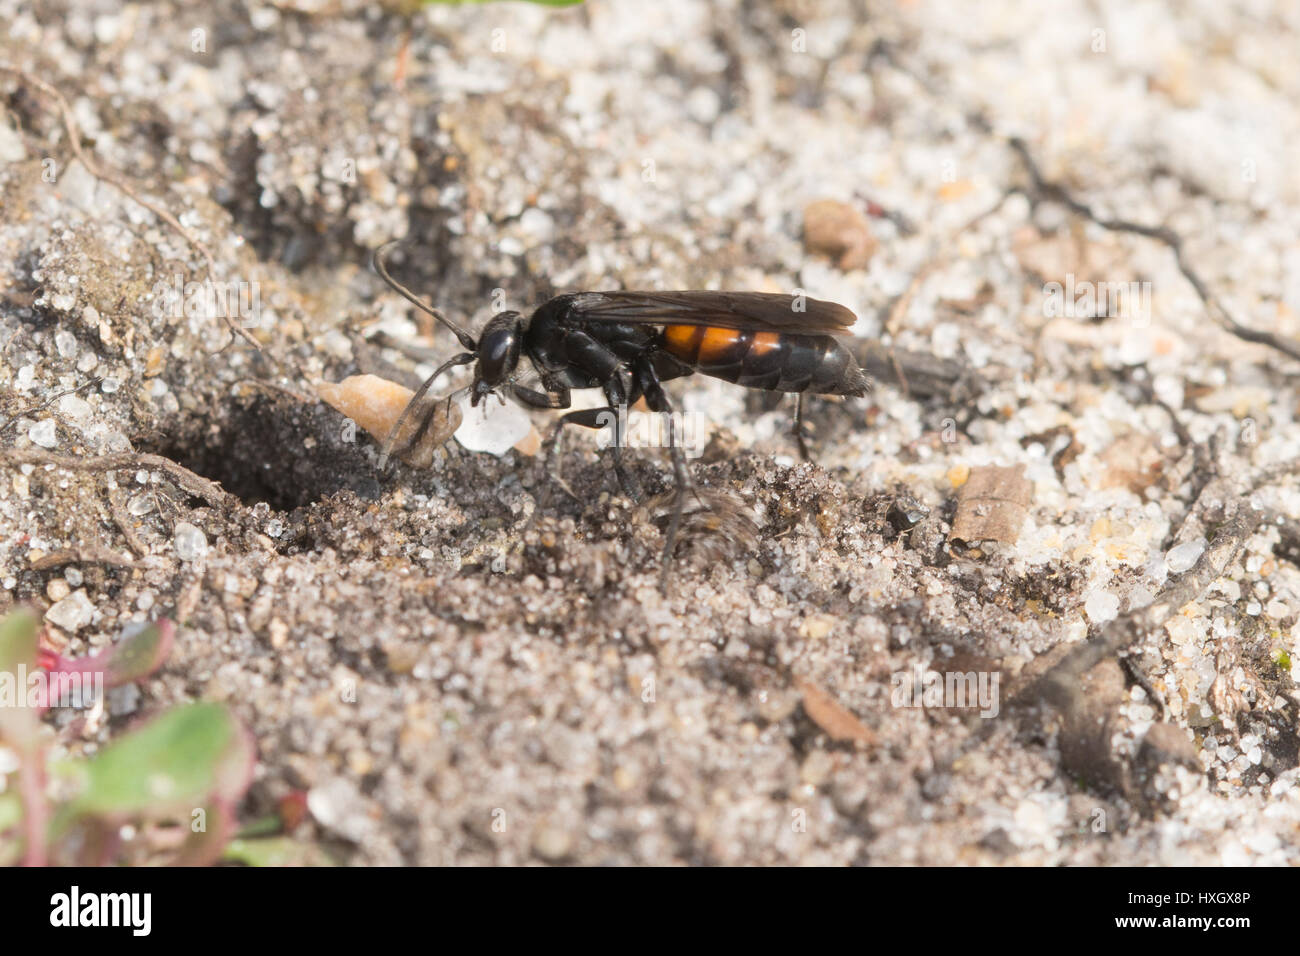 Black-banded spider wasp (Anoplius viaticus) near its burrow in the sand Stock Photo